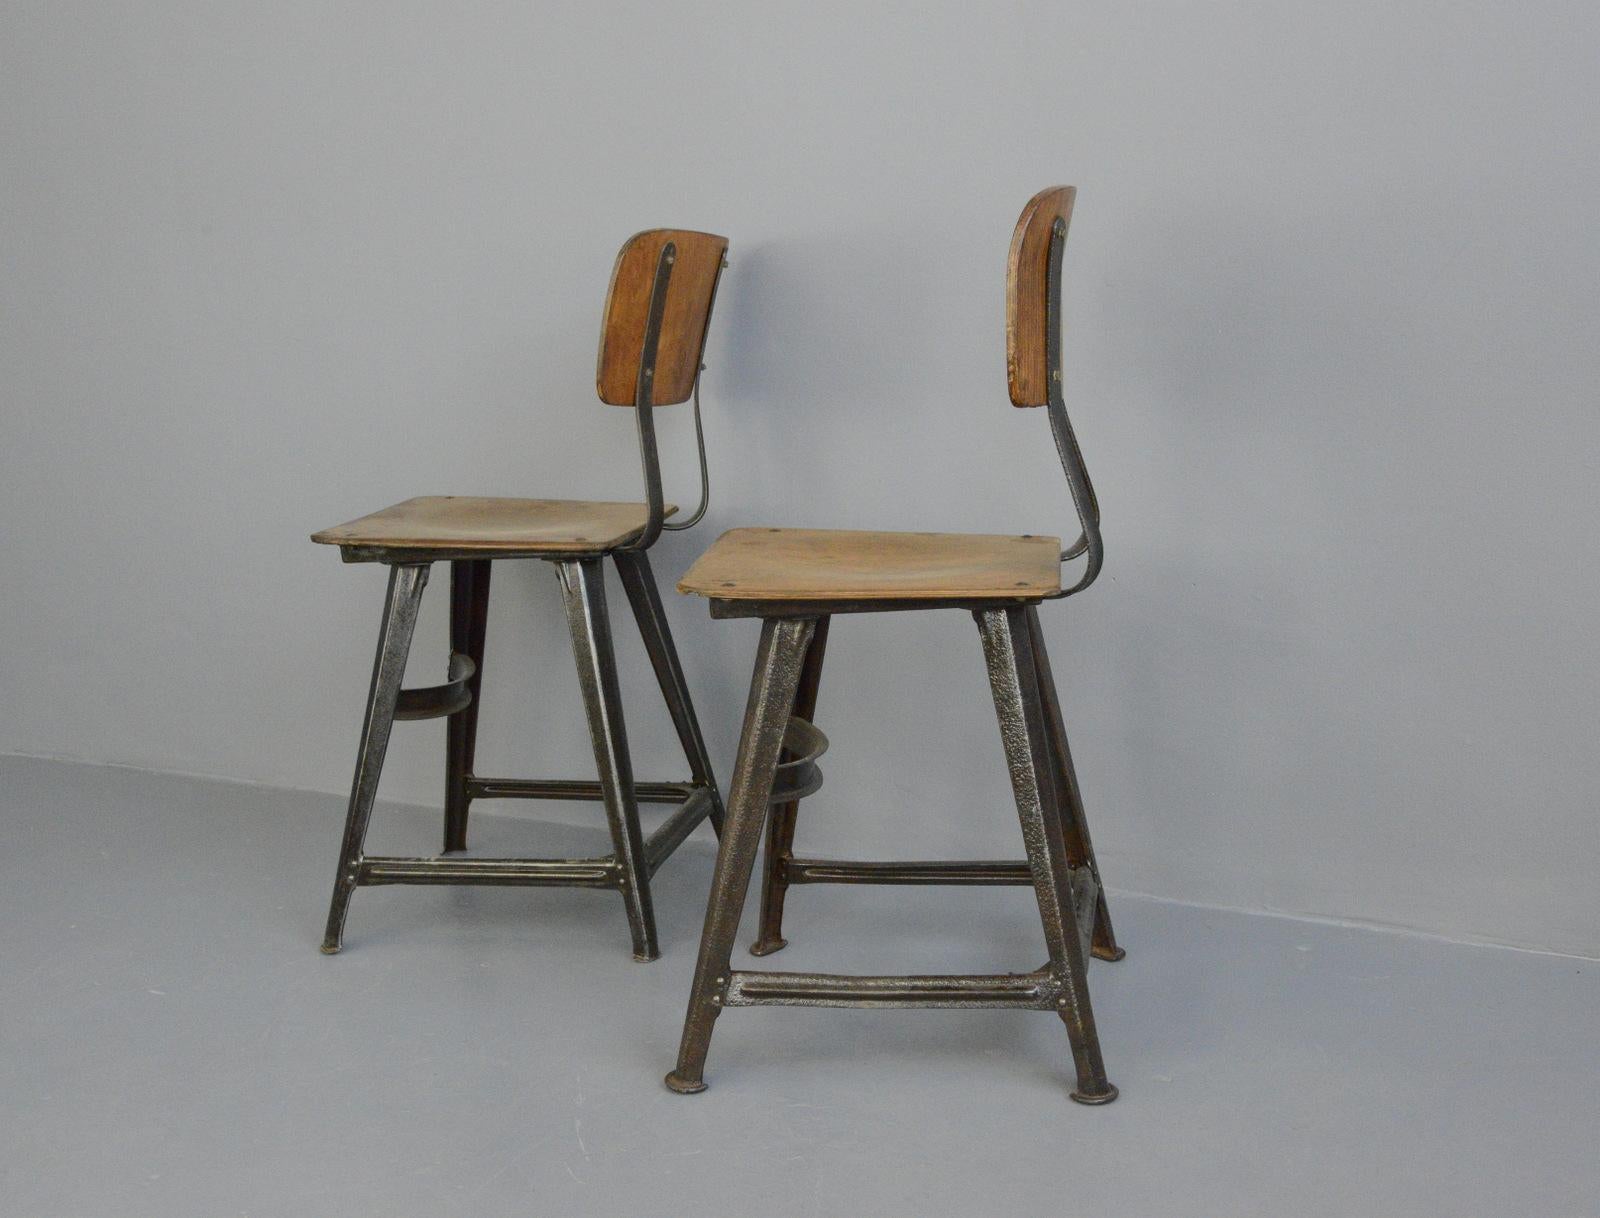 Steel Industrial Factory Chairs by Rowa, circa 1920s